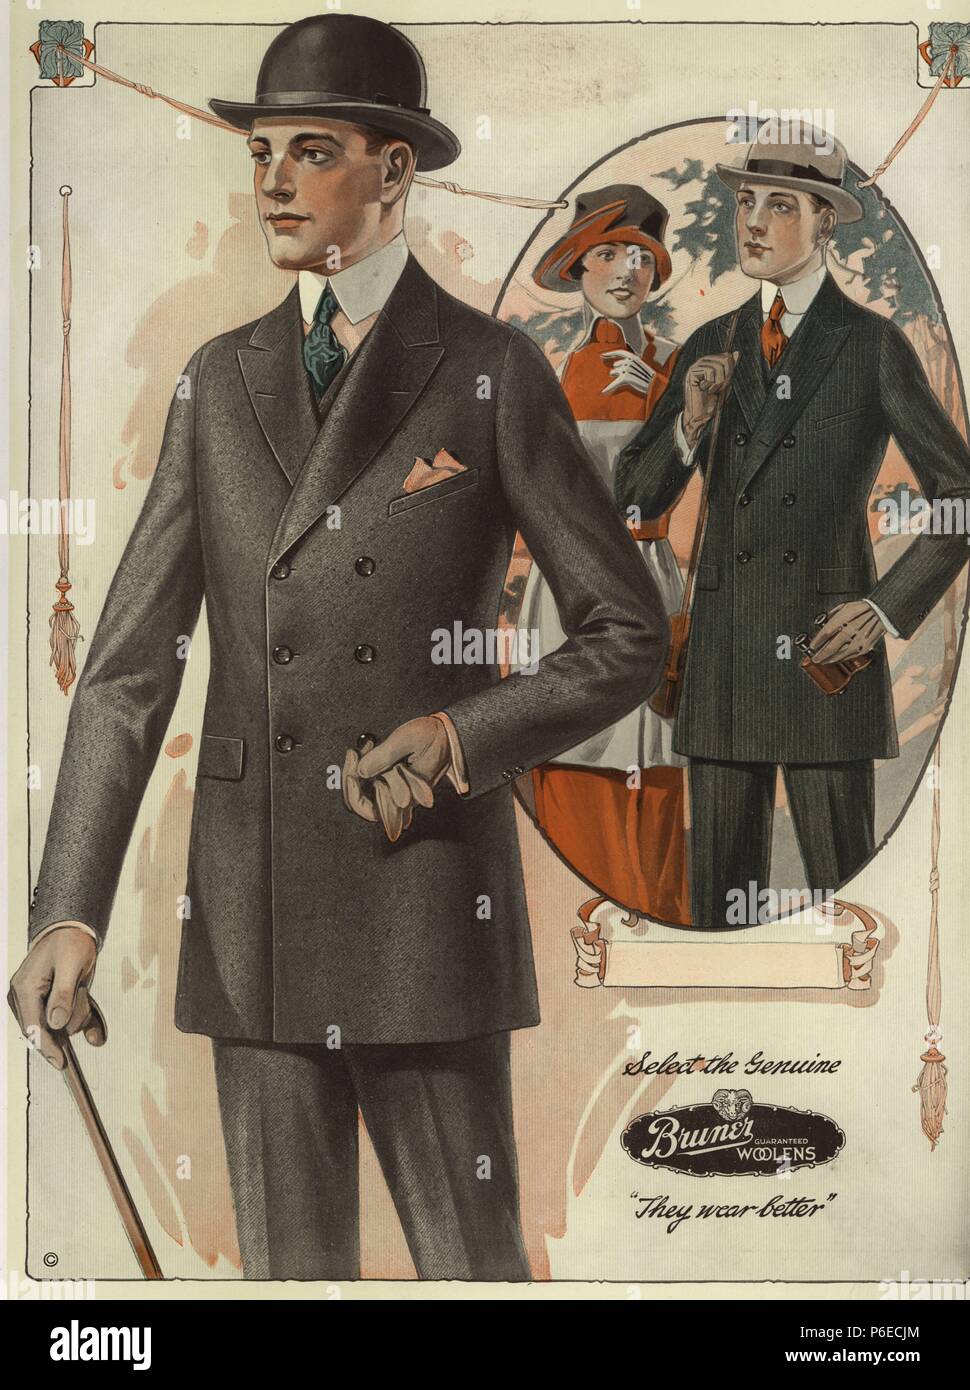 Men's conservative double-breasted suits in sack. Chromolithograph from a catalog of male winter fashions from Bruner Woolens, 1920. Stock Photo